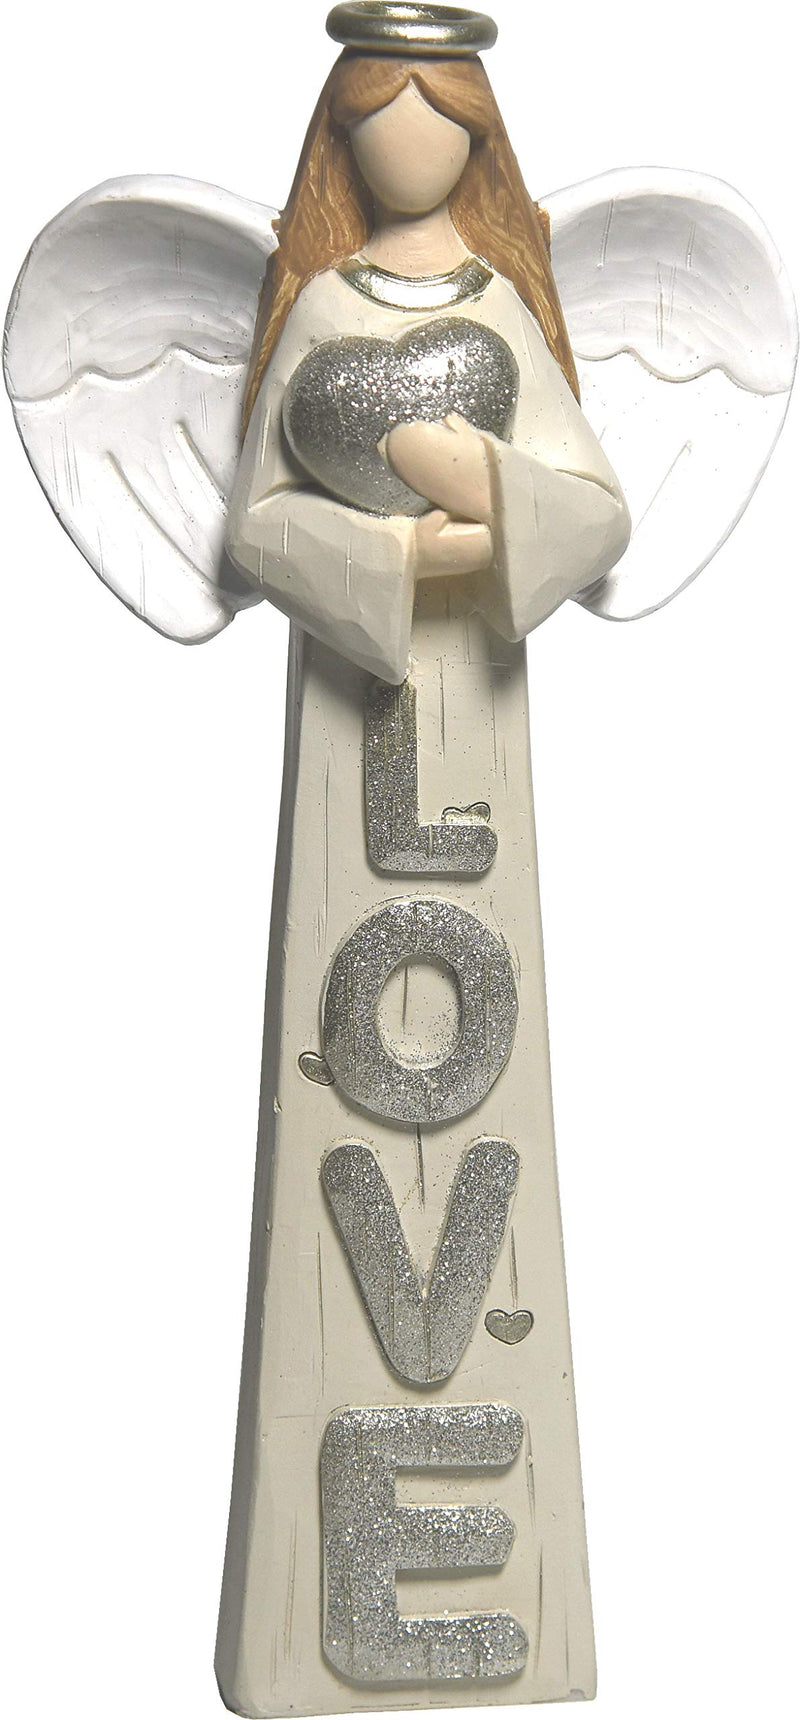 Holy Land Market Resin Love Angel - Decorated with Stars